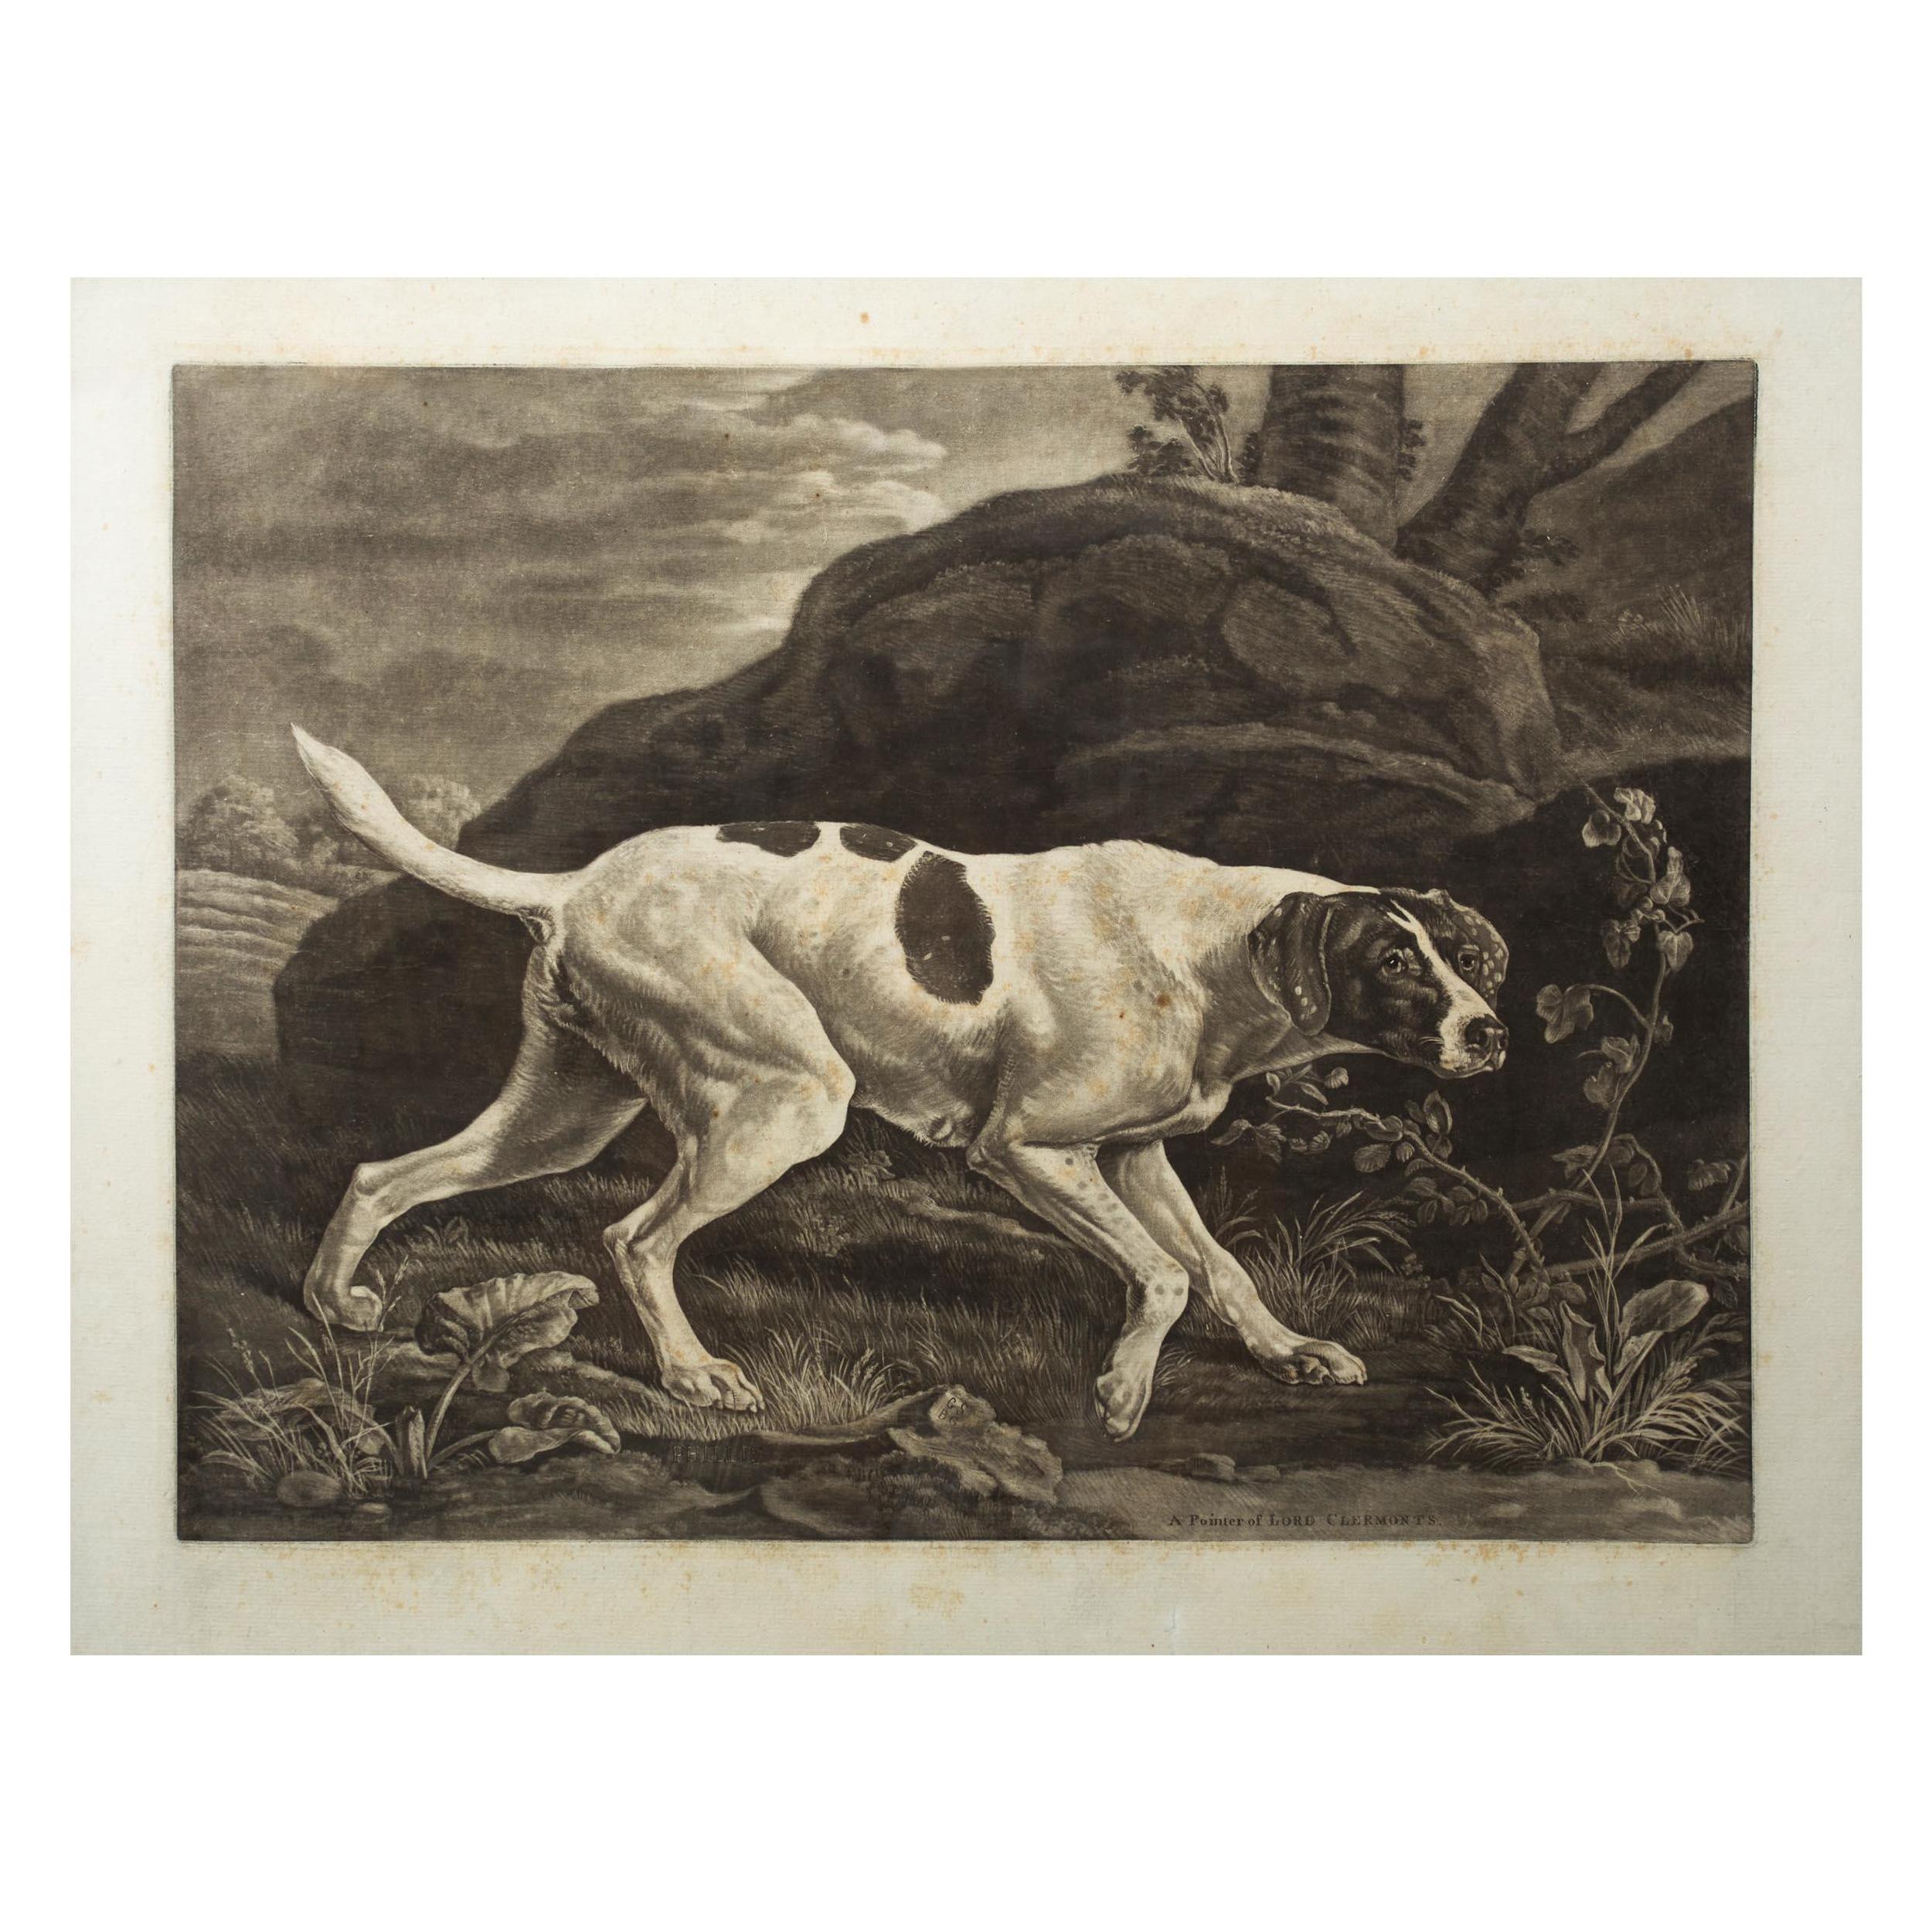 A rare mezzotint engraving on laid paper executed by Benjamin Green after the oil painting by George Stubbs and published in London in 1772. It depicts Phillis, the beloved pointer dog belonging to William Henry Fortescue, the Earl of Clermont